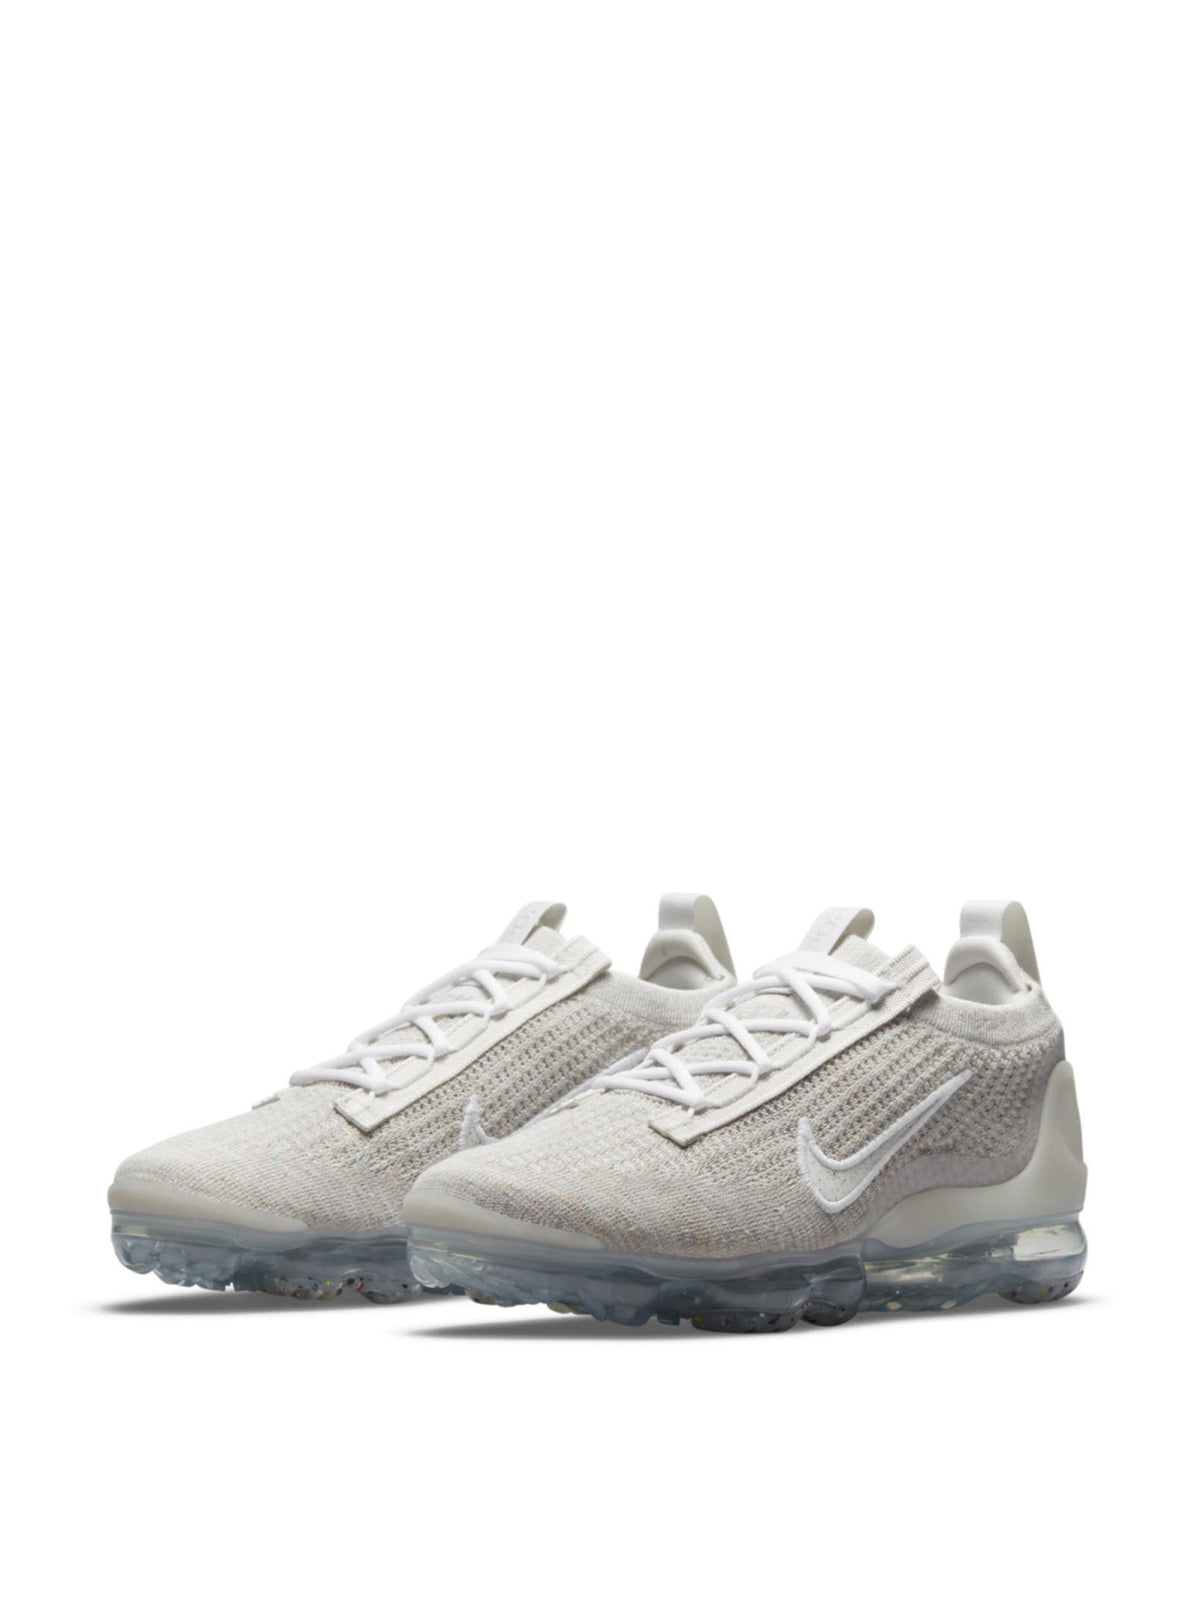 Nike-OUTLET-SALE-Air Vapormax 2021 FlyKnit Sneakers-ARCHIVIST